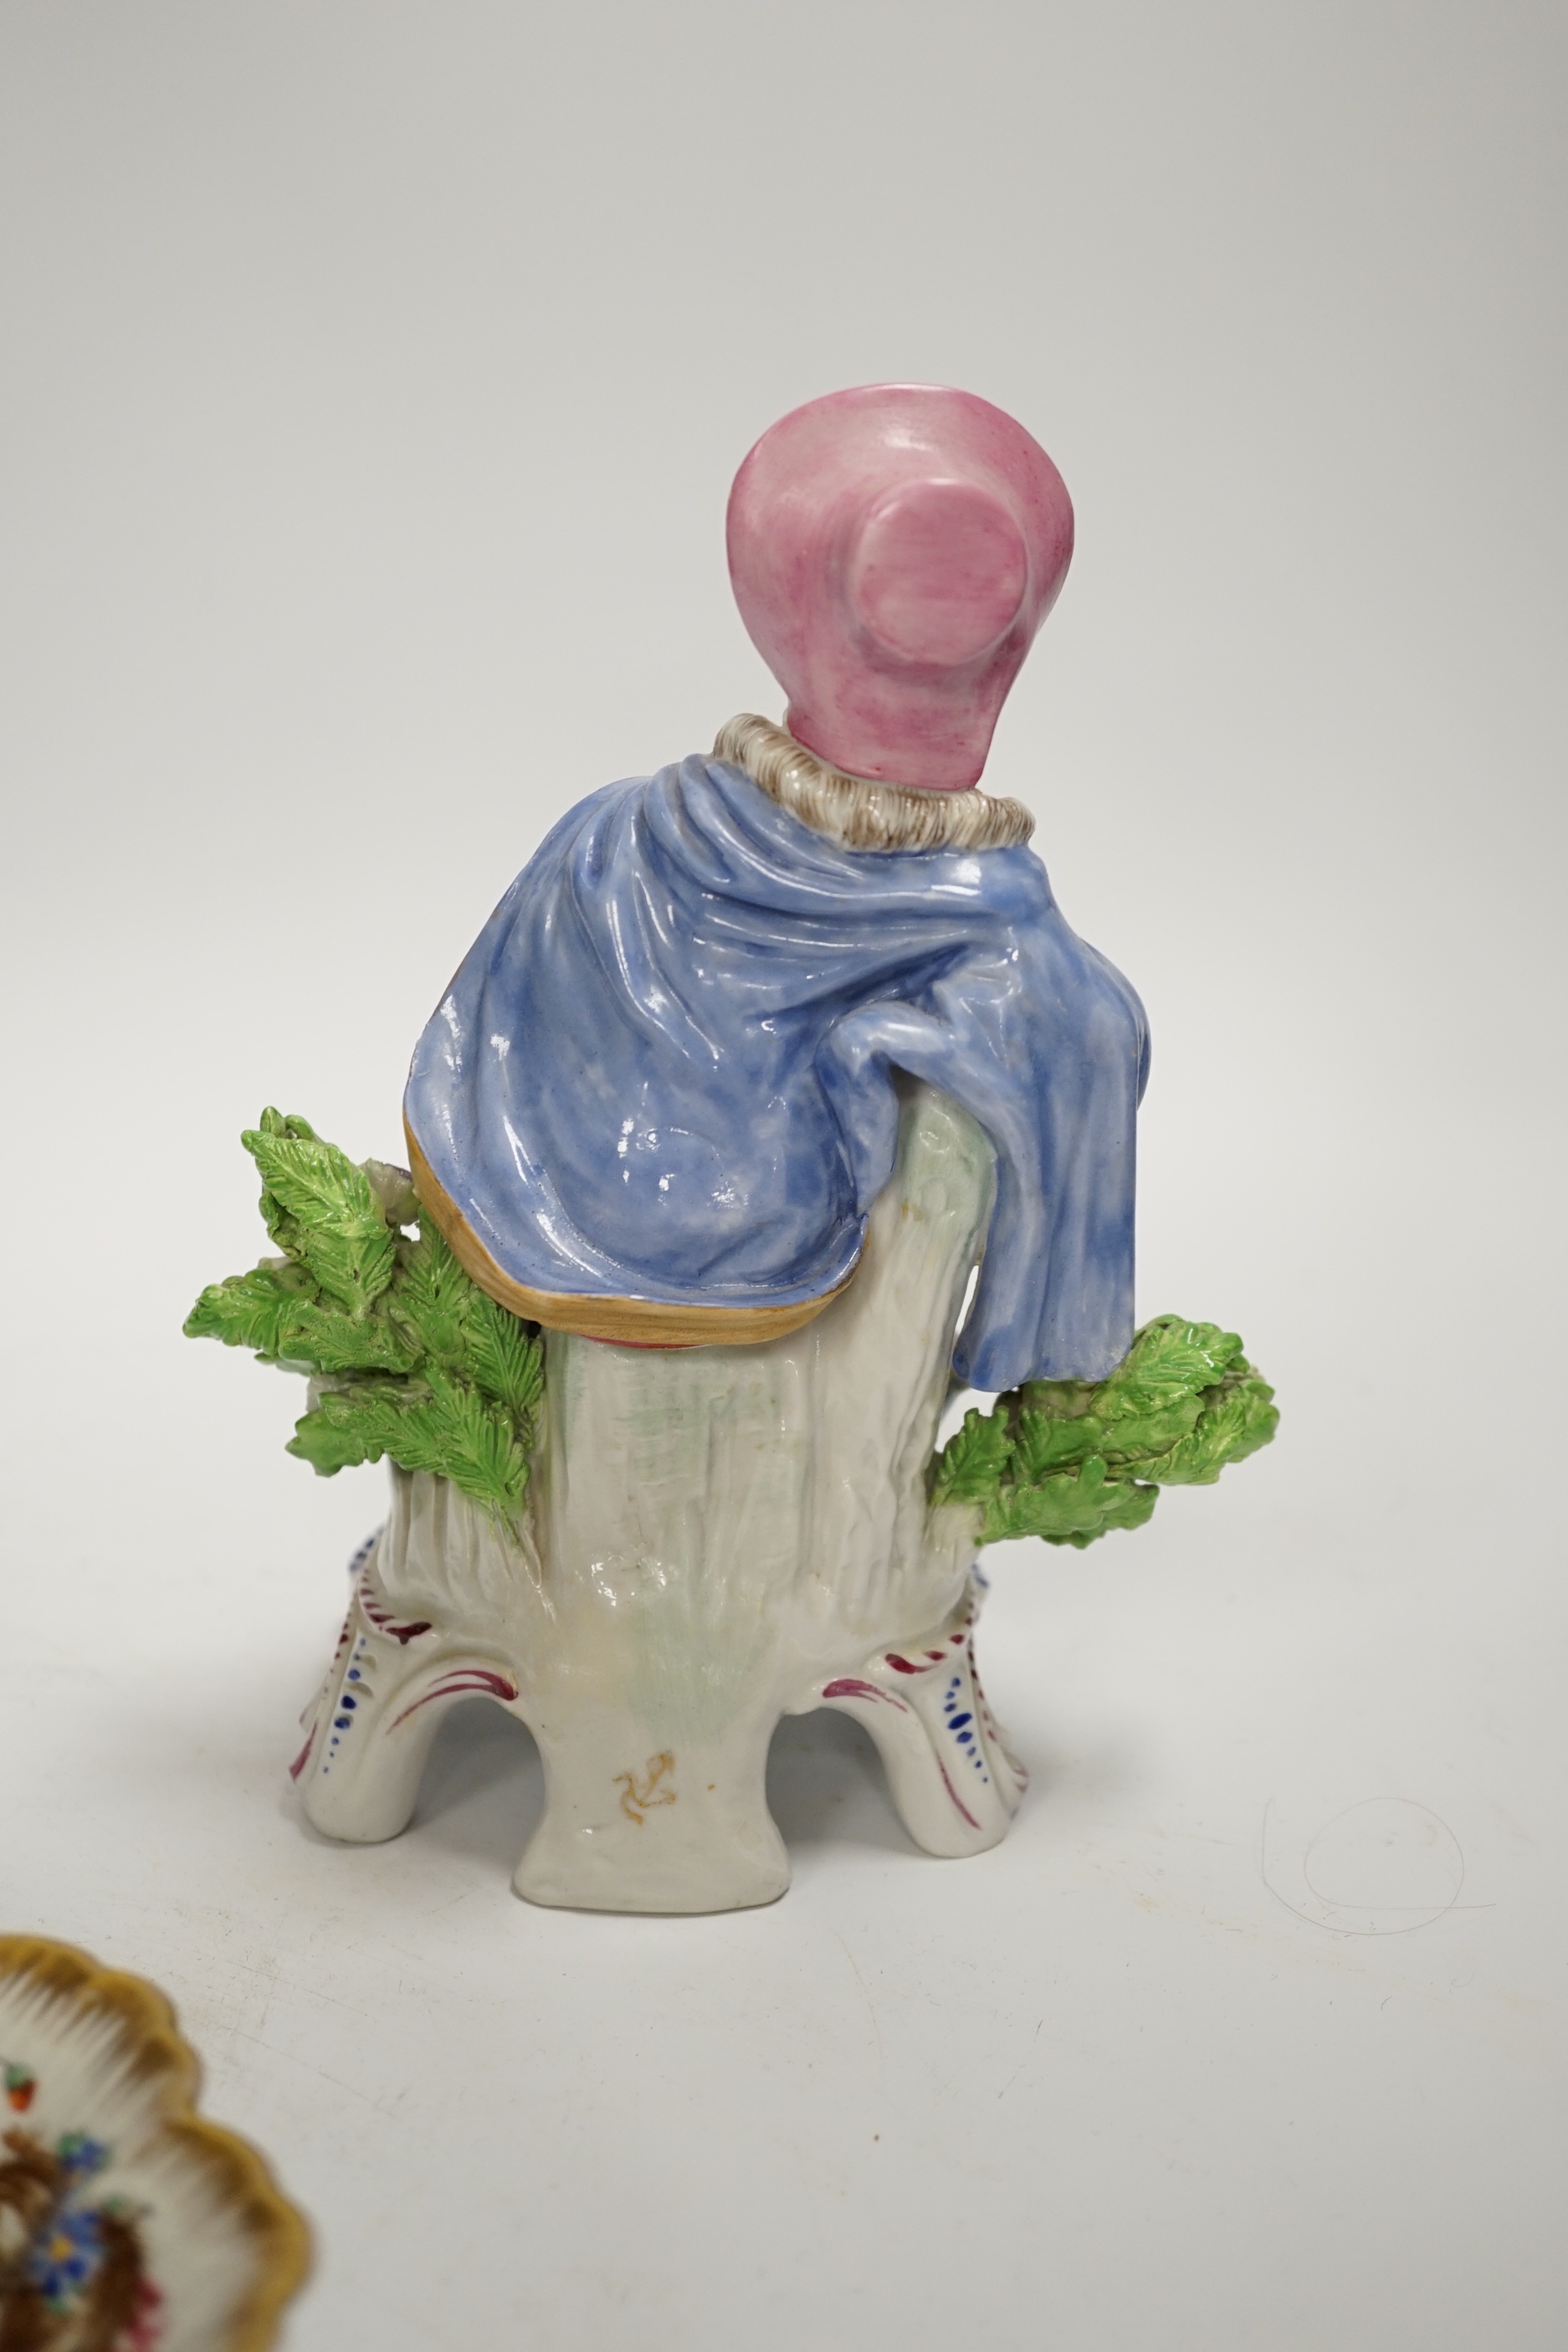 A Continental flower and insect painted dish and a Samson Chelsea style figure, 18cm